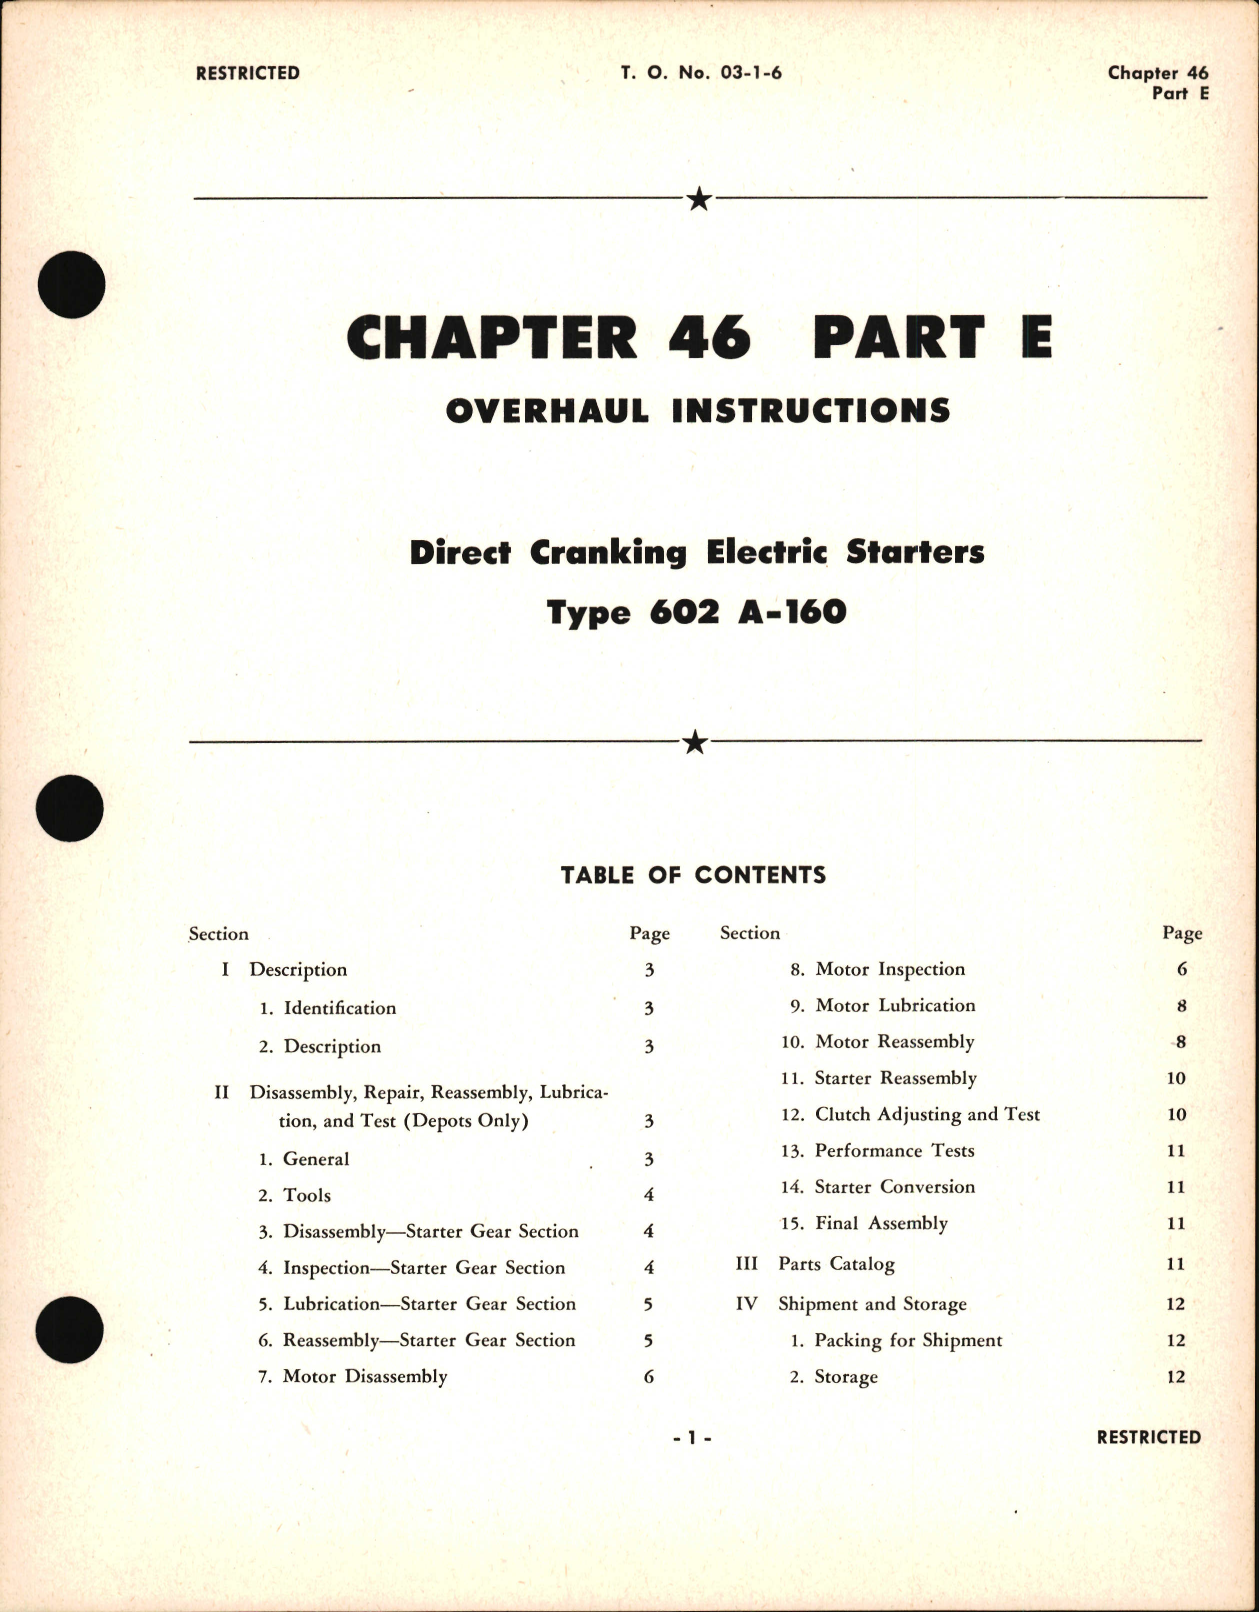 Sample page 1 from AirCorps Library document: Overhaul Instructions for Direct Cranking Electric Starters, Chapter 46 Part E